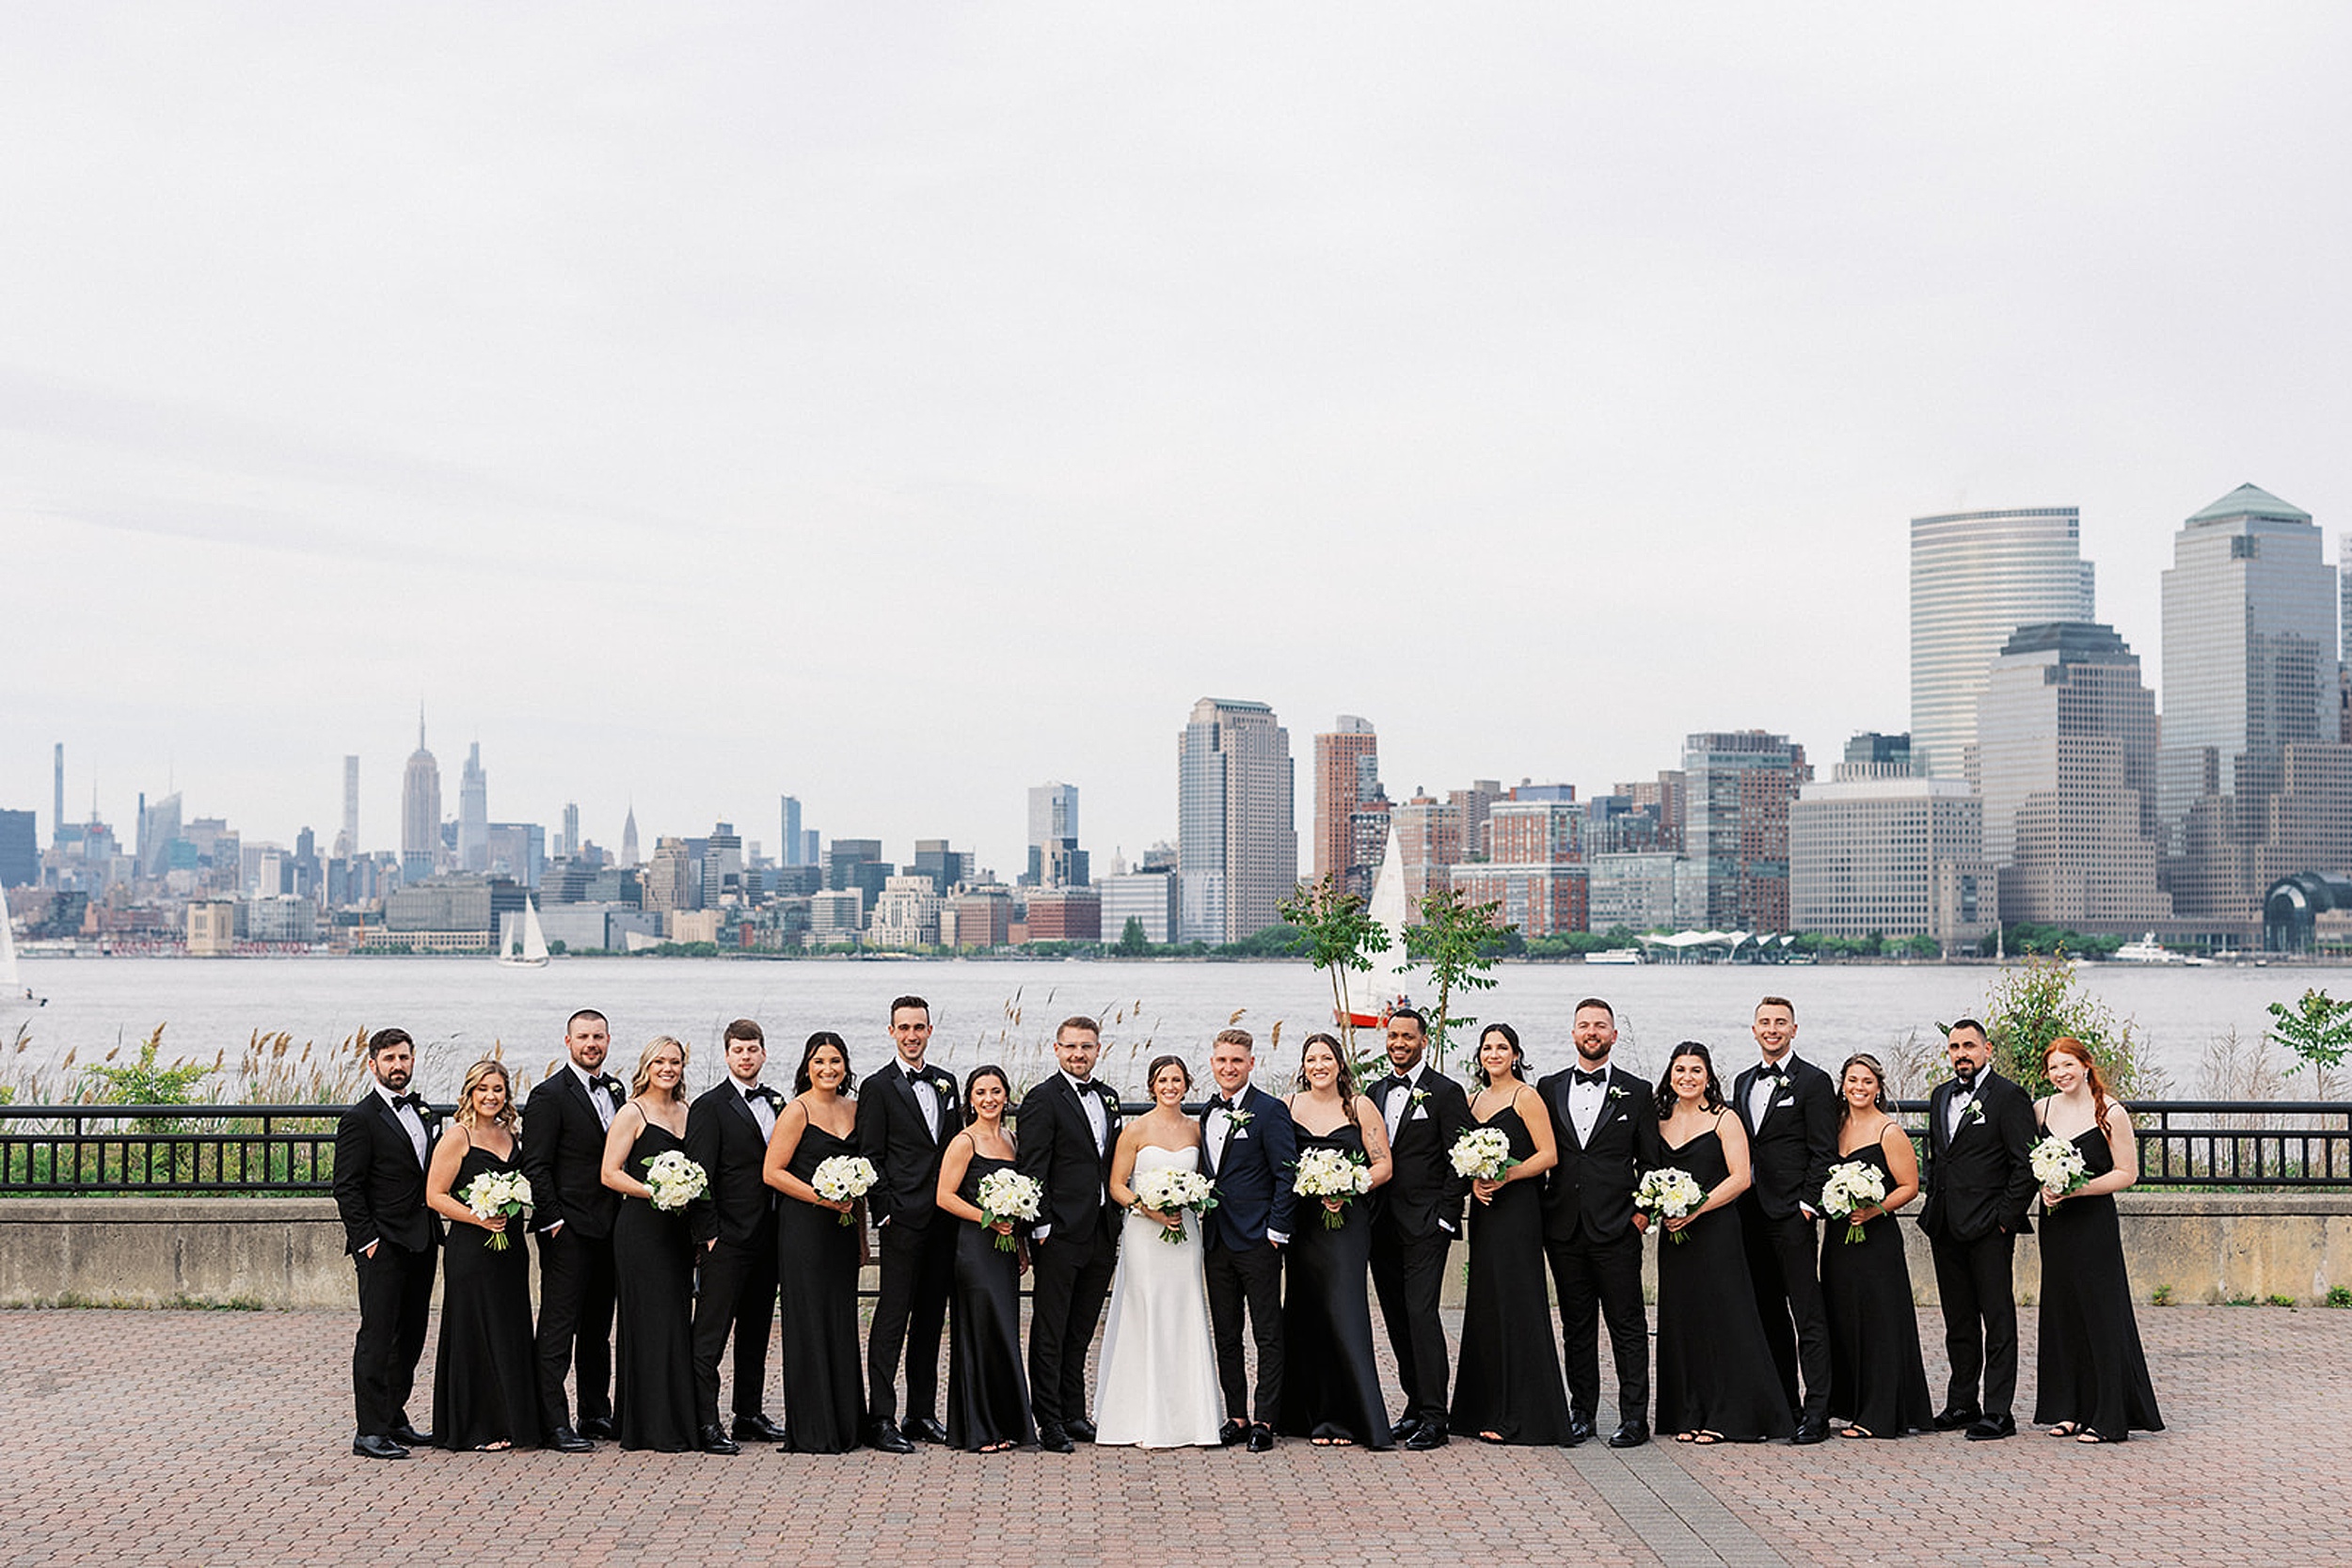 A wedding party stands together in a park on the river with the New York City skyline behind them